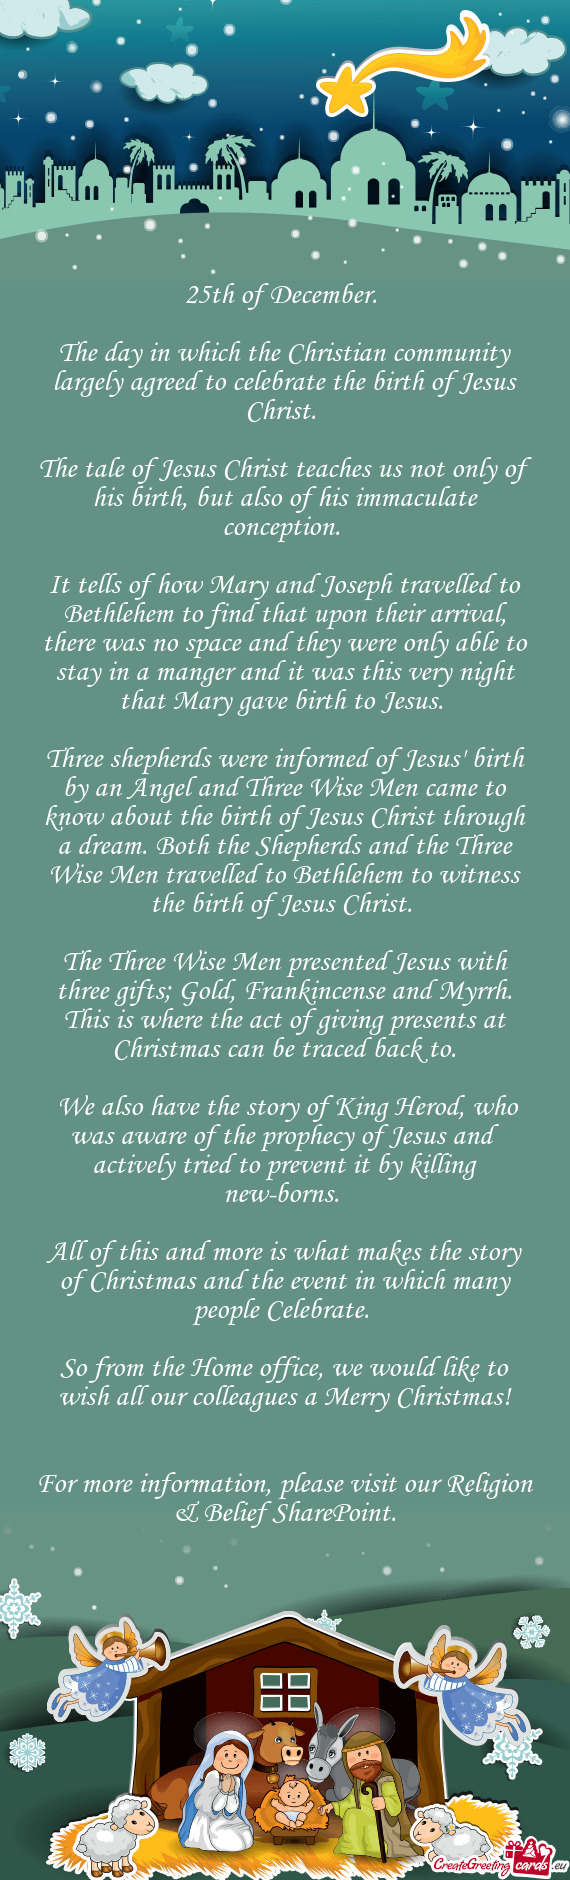 The day in which the Christian community largely agreed to celebrate the birth of Jesus Christ